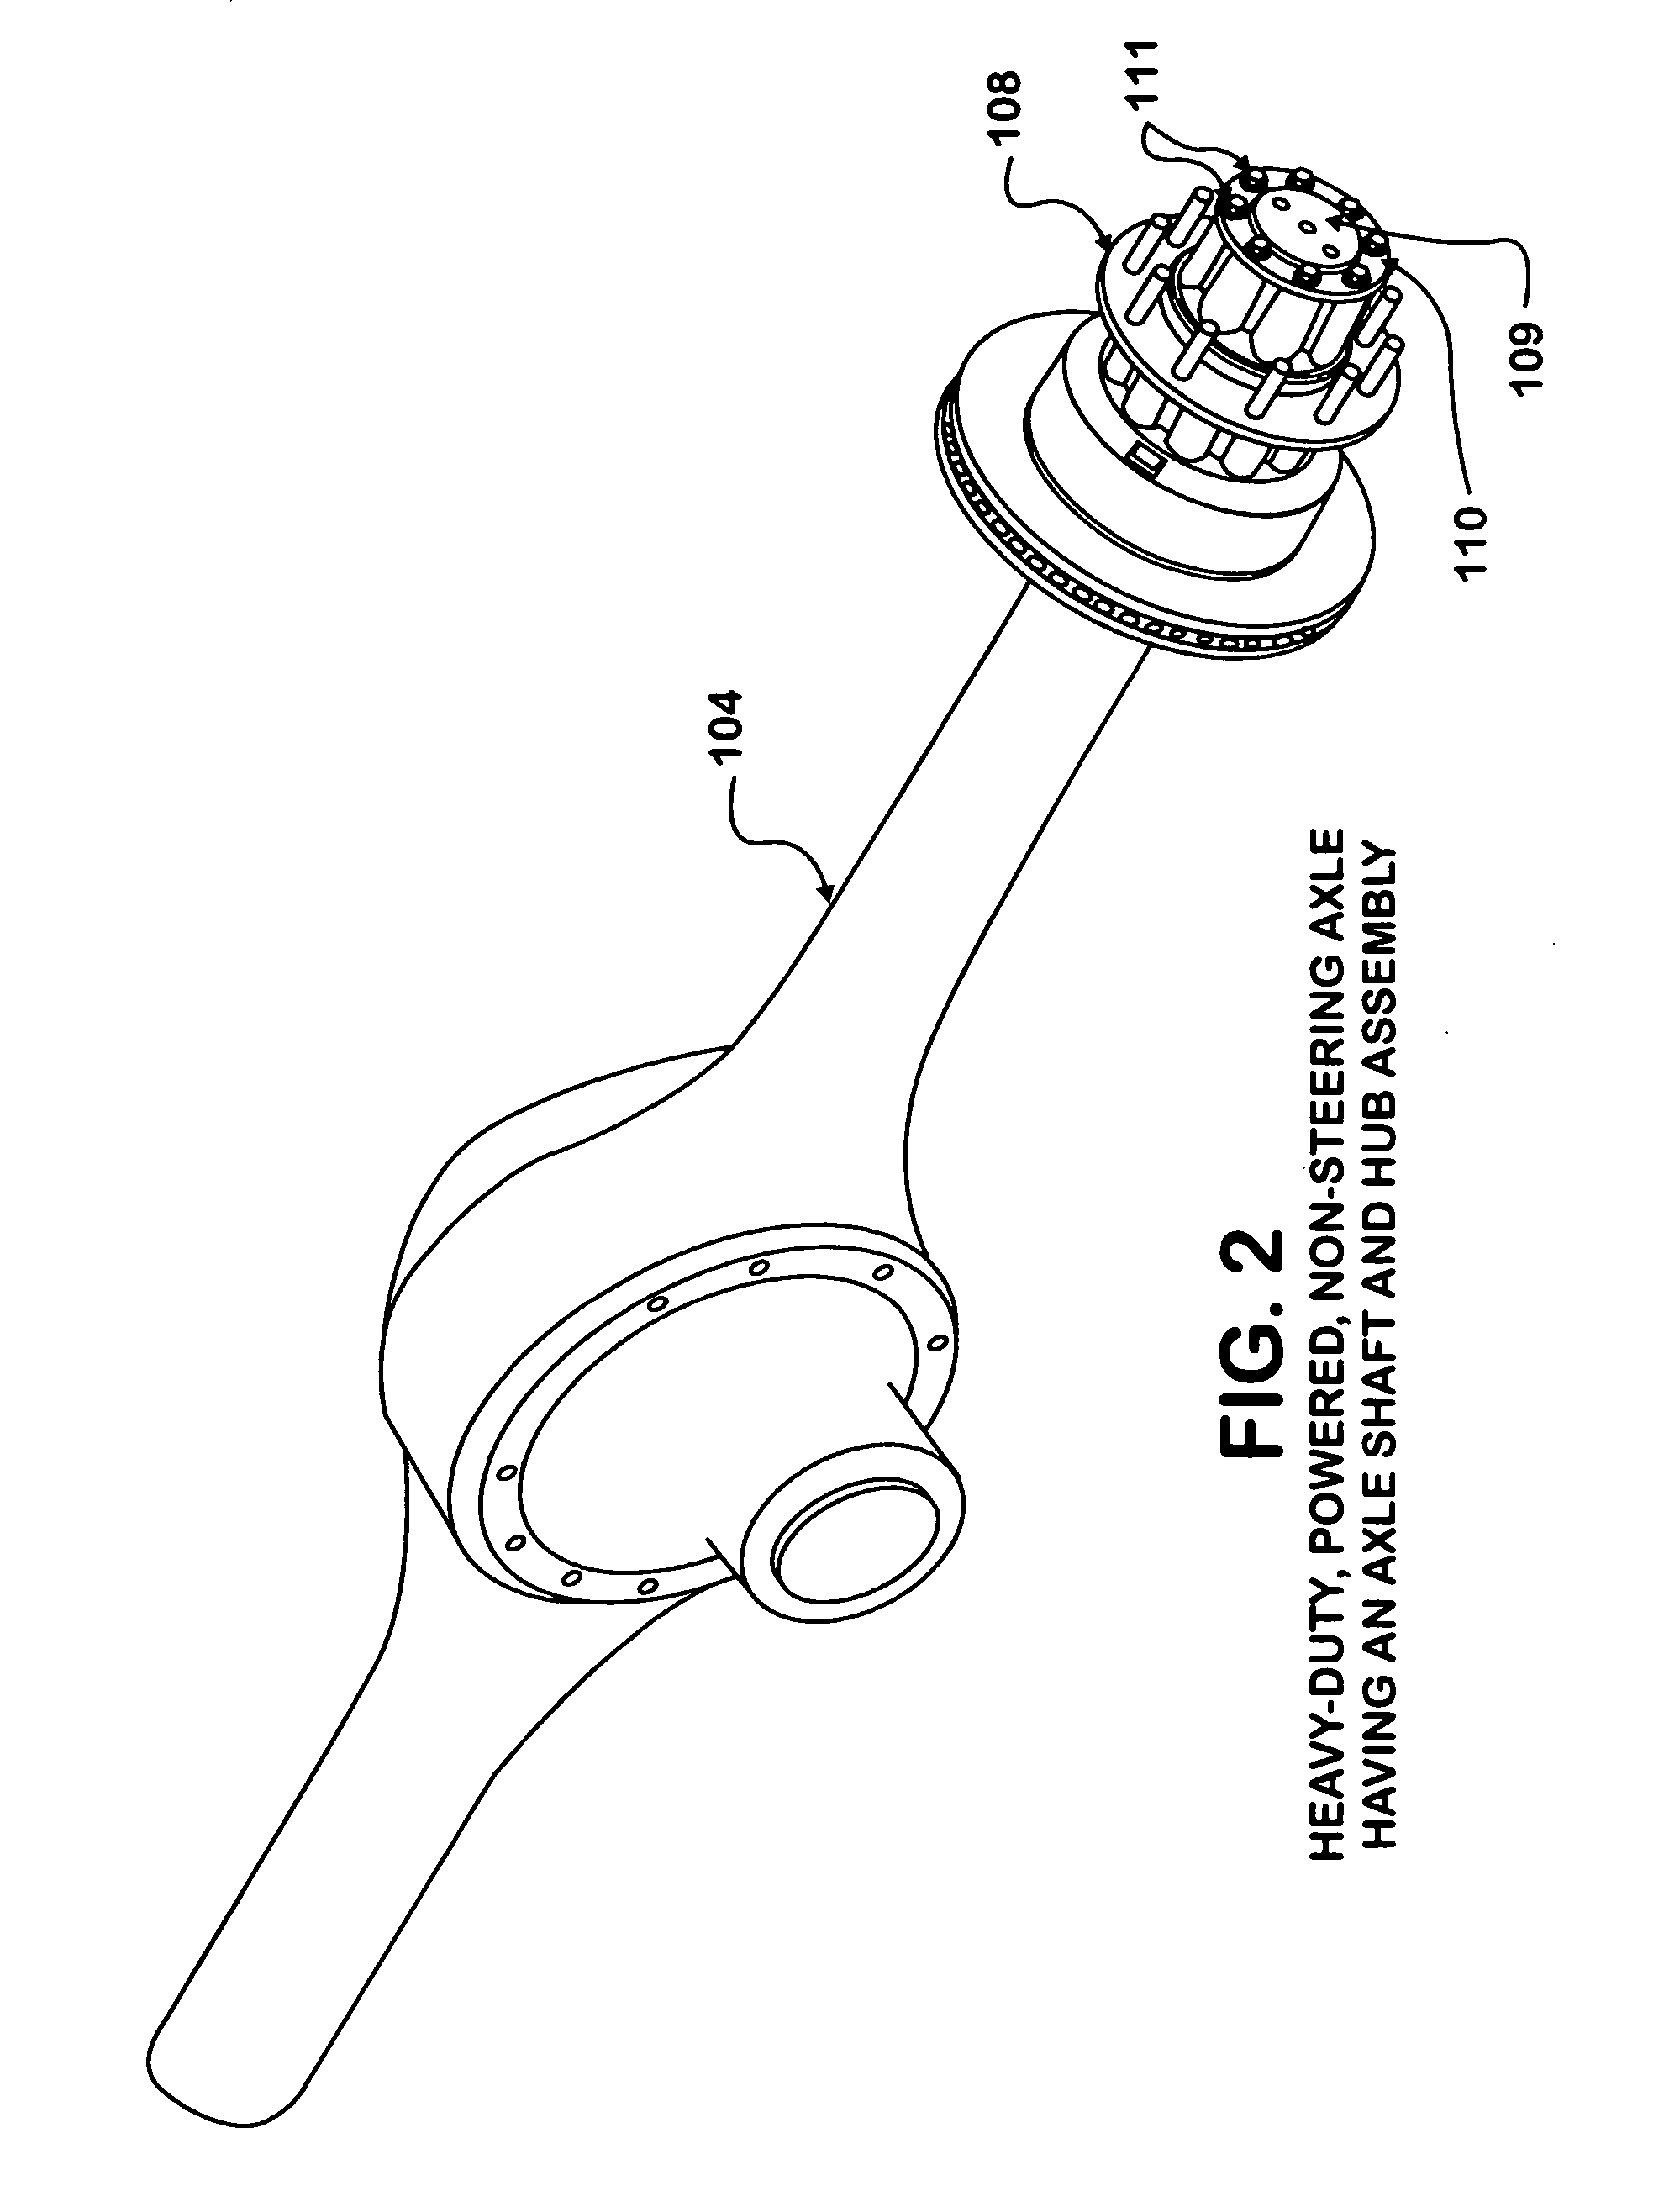 Specialized, tapered bolts for rear axle shafts